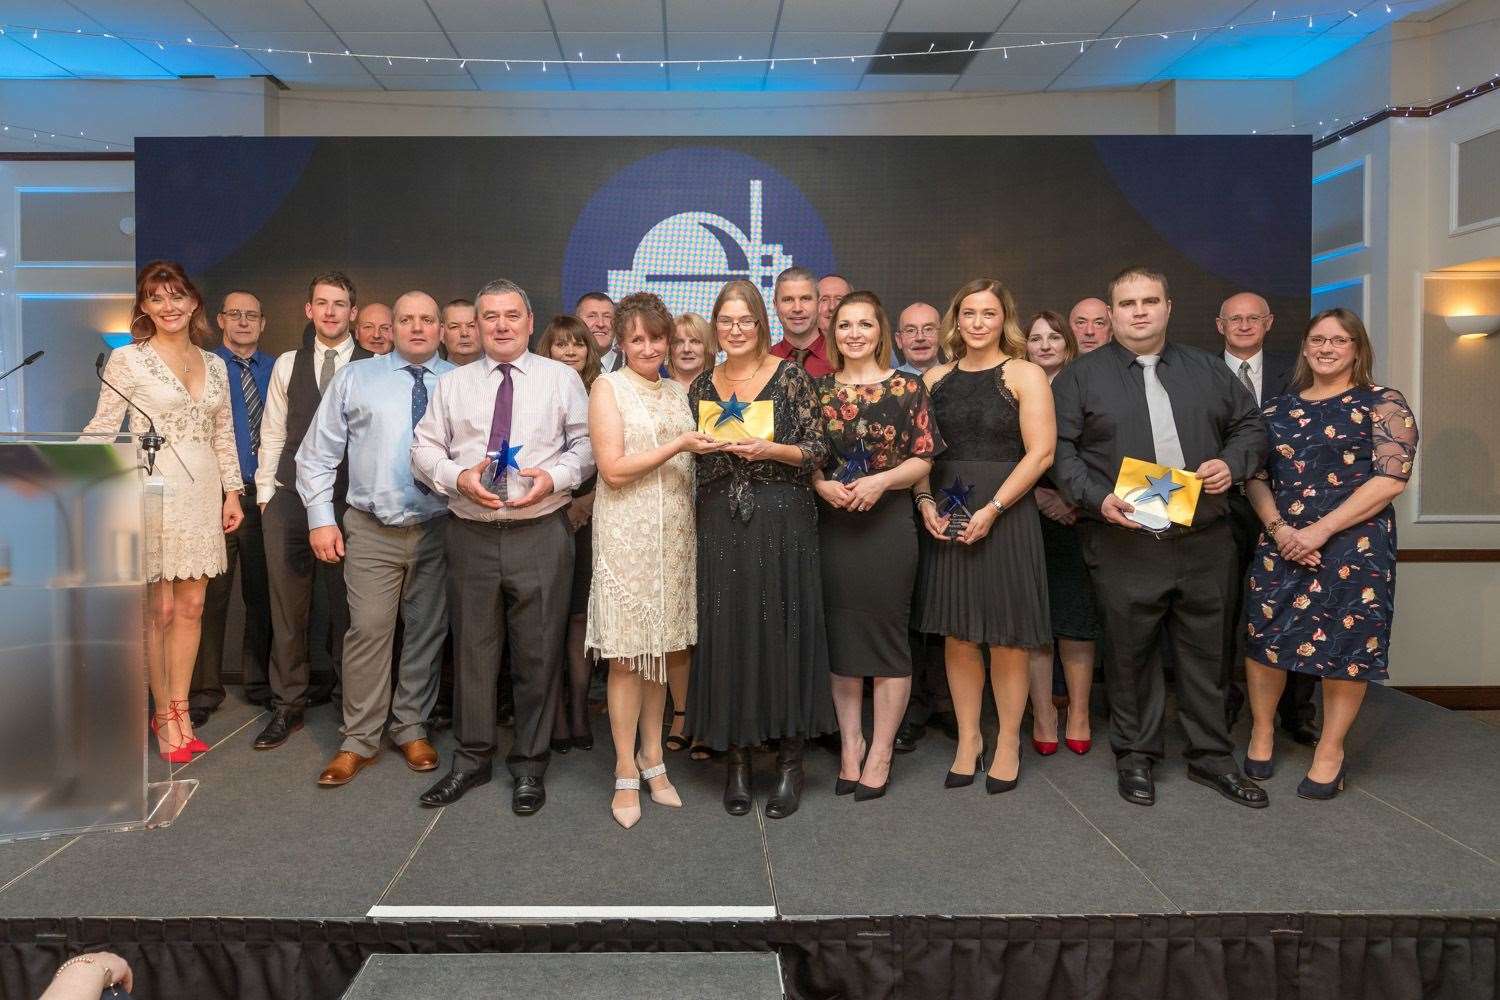 Winners of the Decommissioning Excellence Awards with presenter and host Nicky Marr (far left).